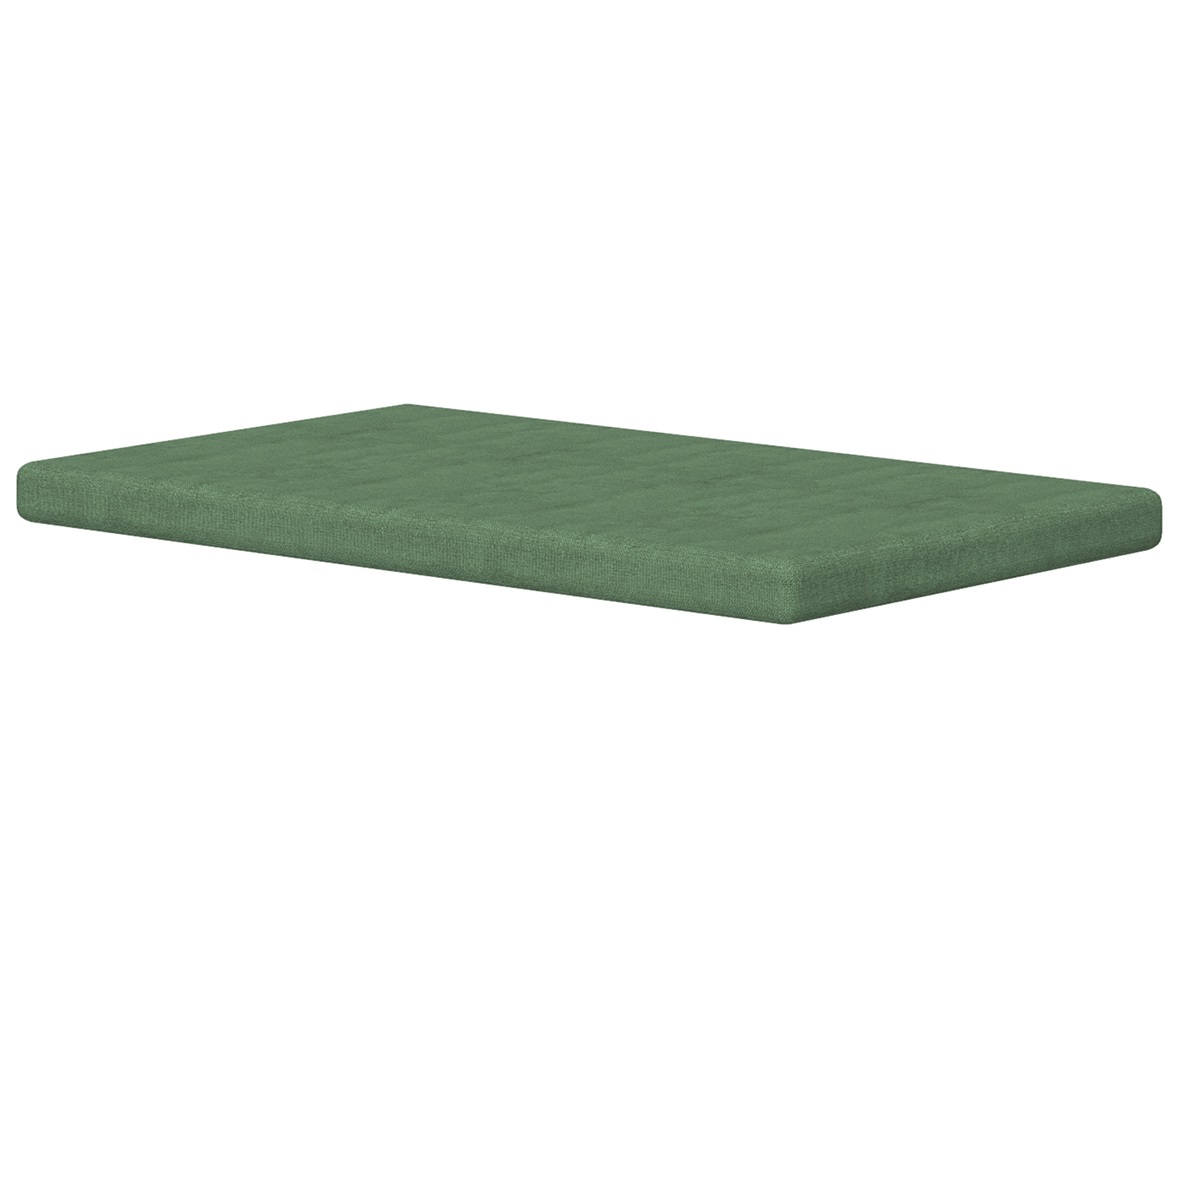 CONNEXION COUSSIN ASSISE VERT FOREST